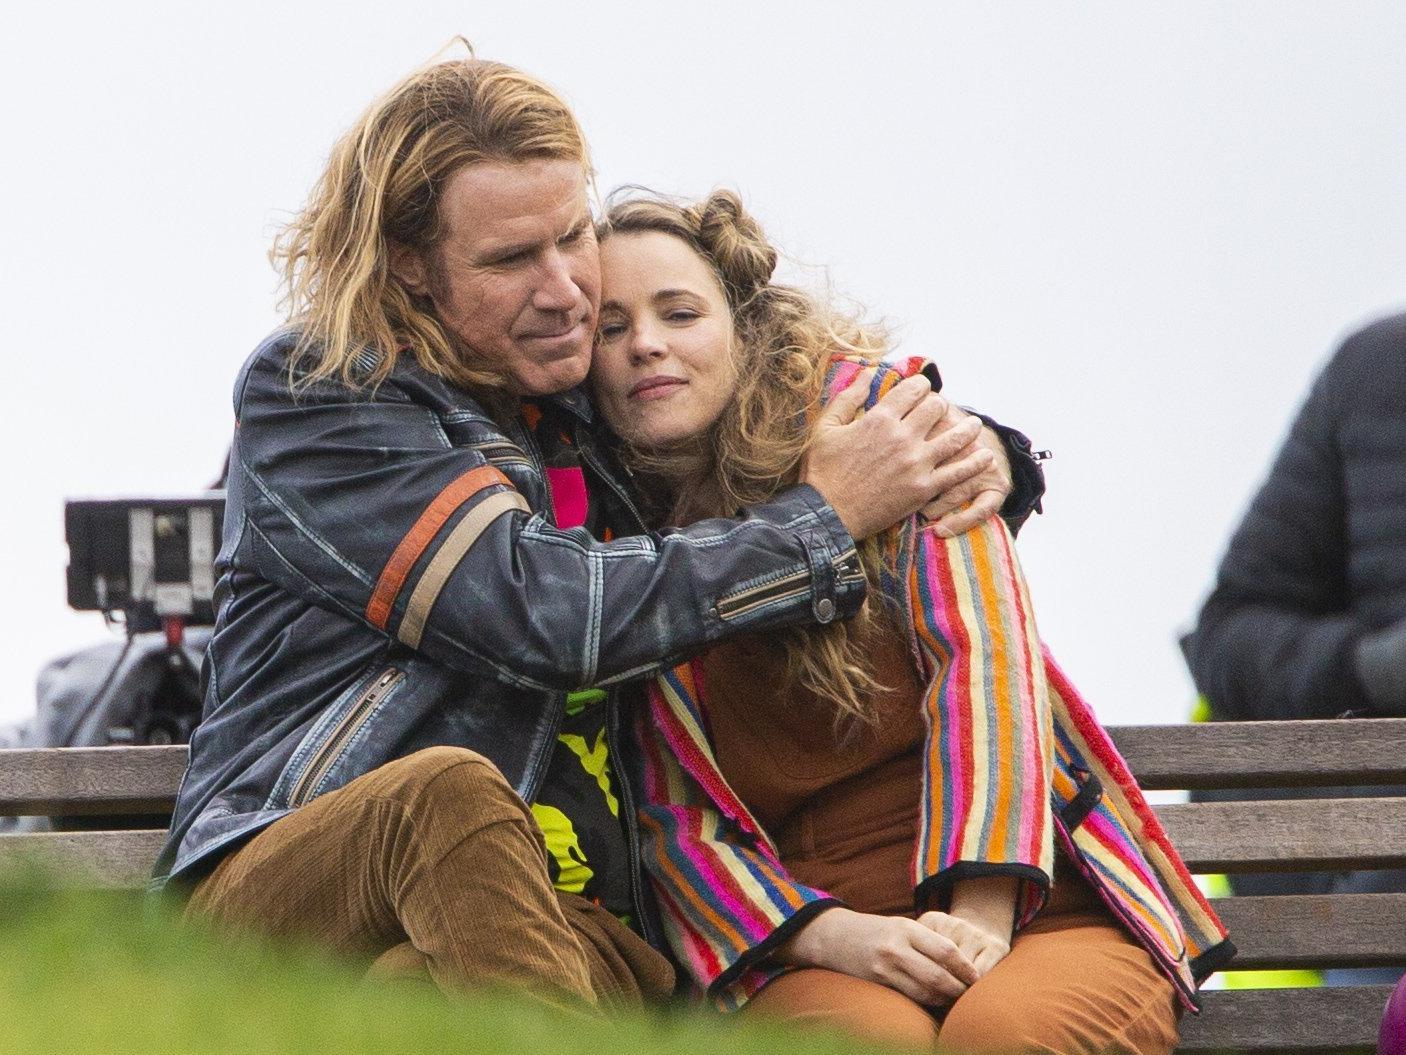 Pictures emerge of Will Ferrell and Rachel McAdams filming 